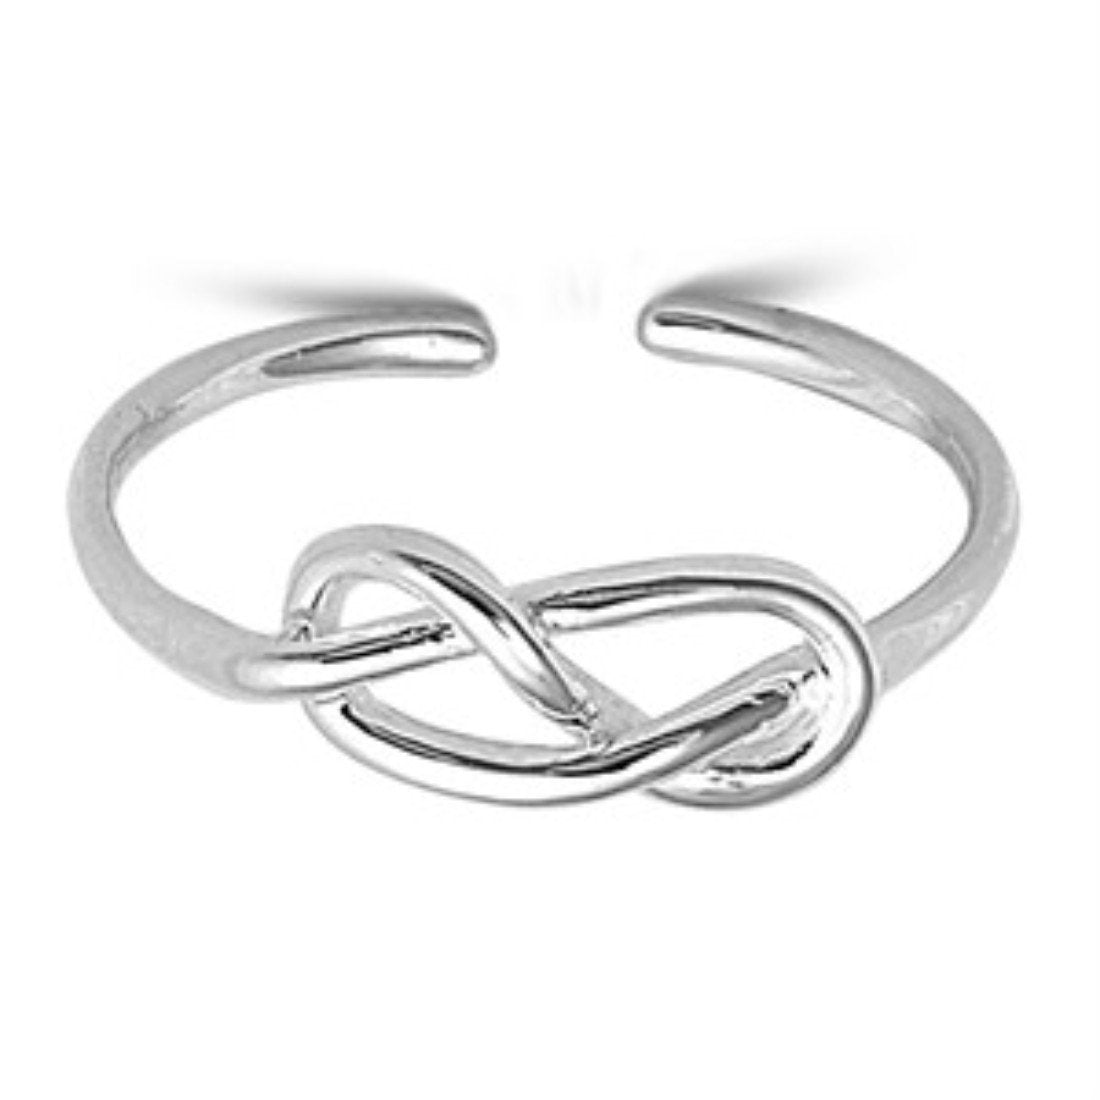 Knot Toe Ring Band Adjustable 925 Sterling Silver (5mm)